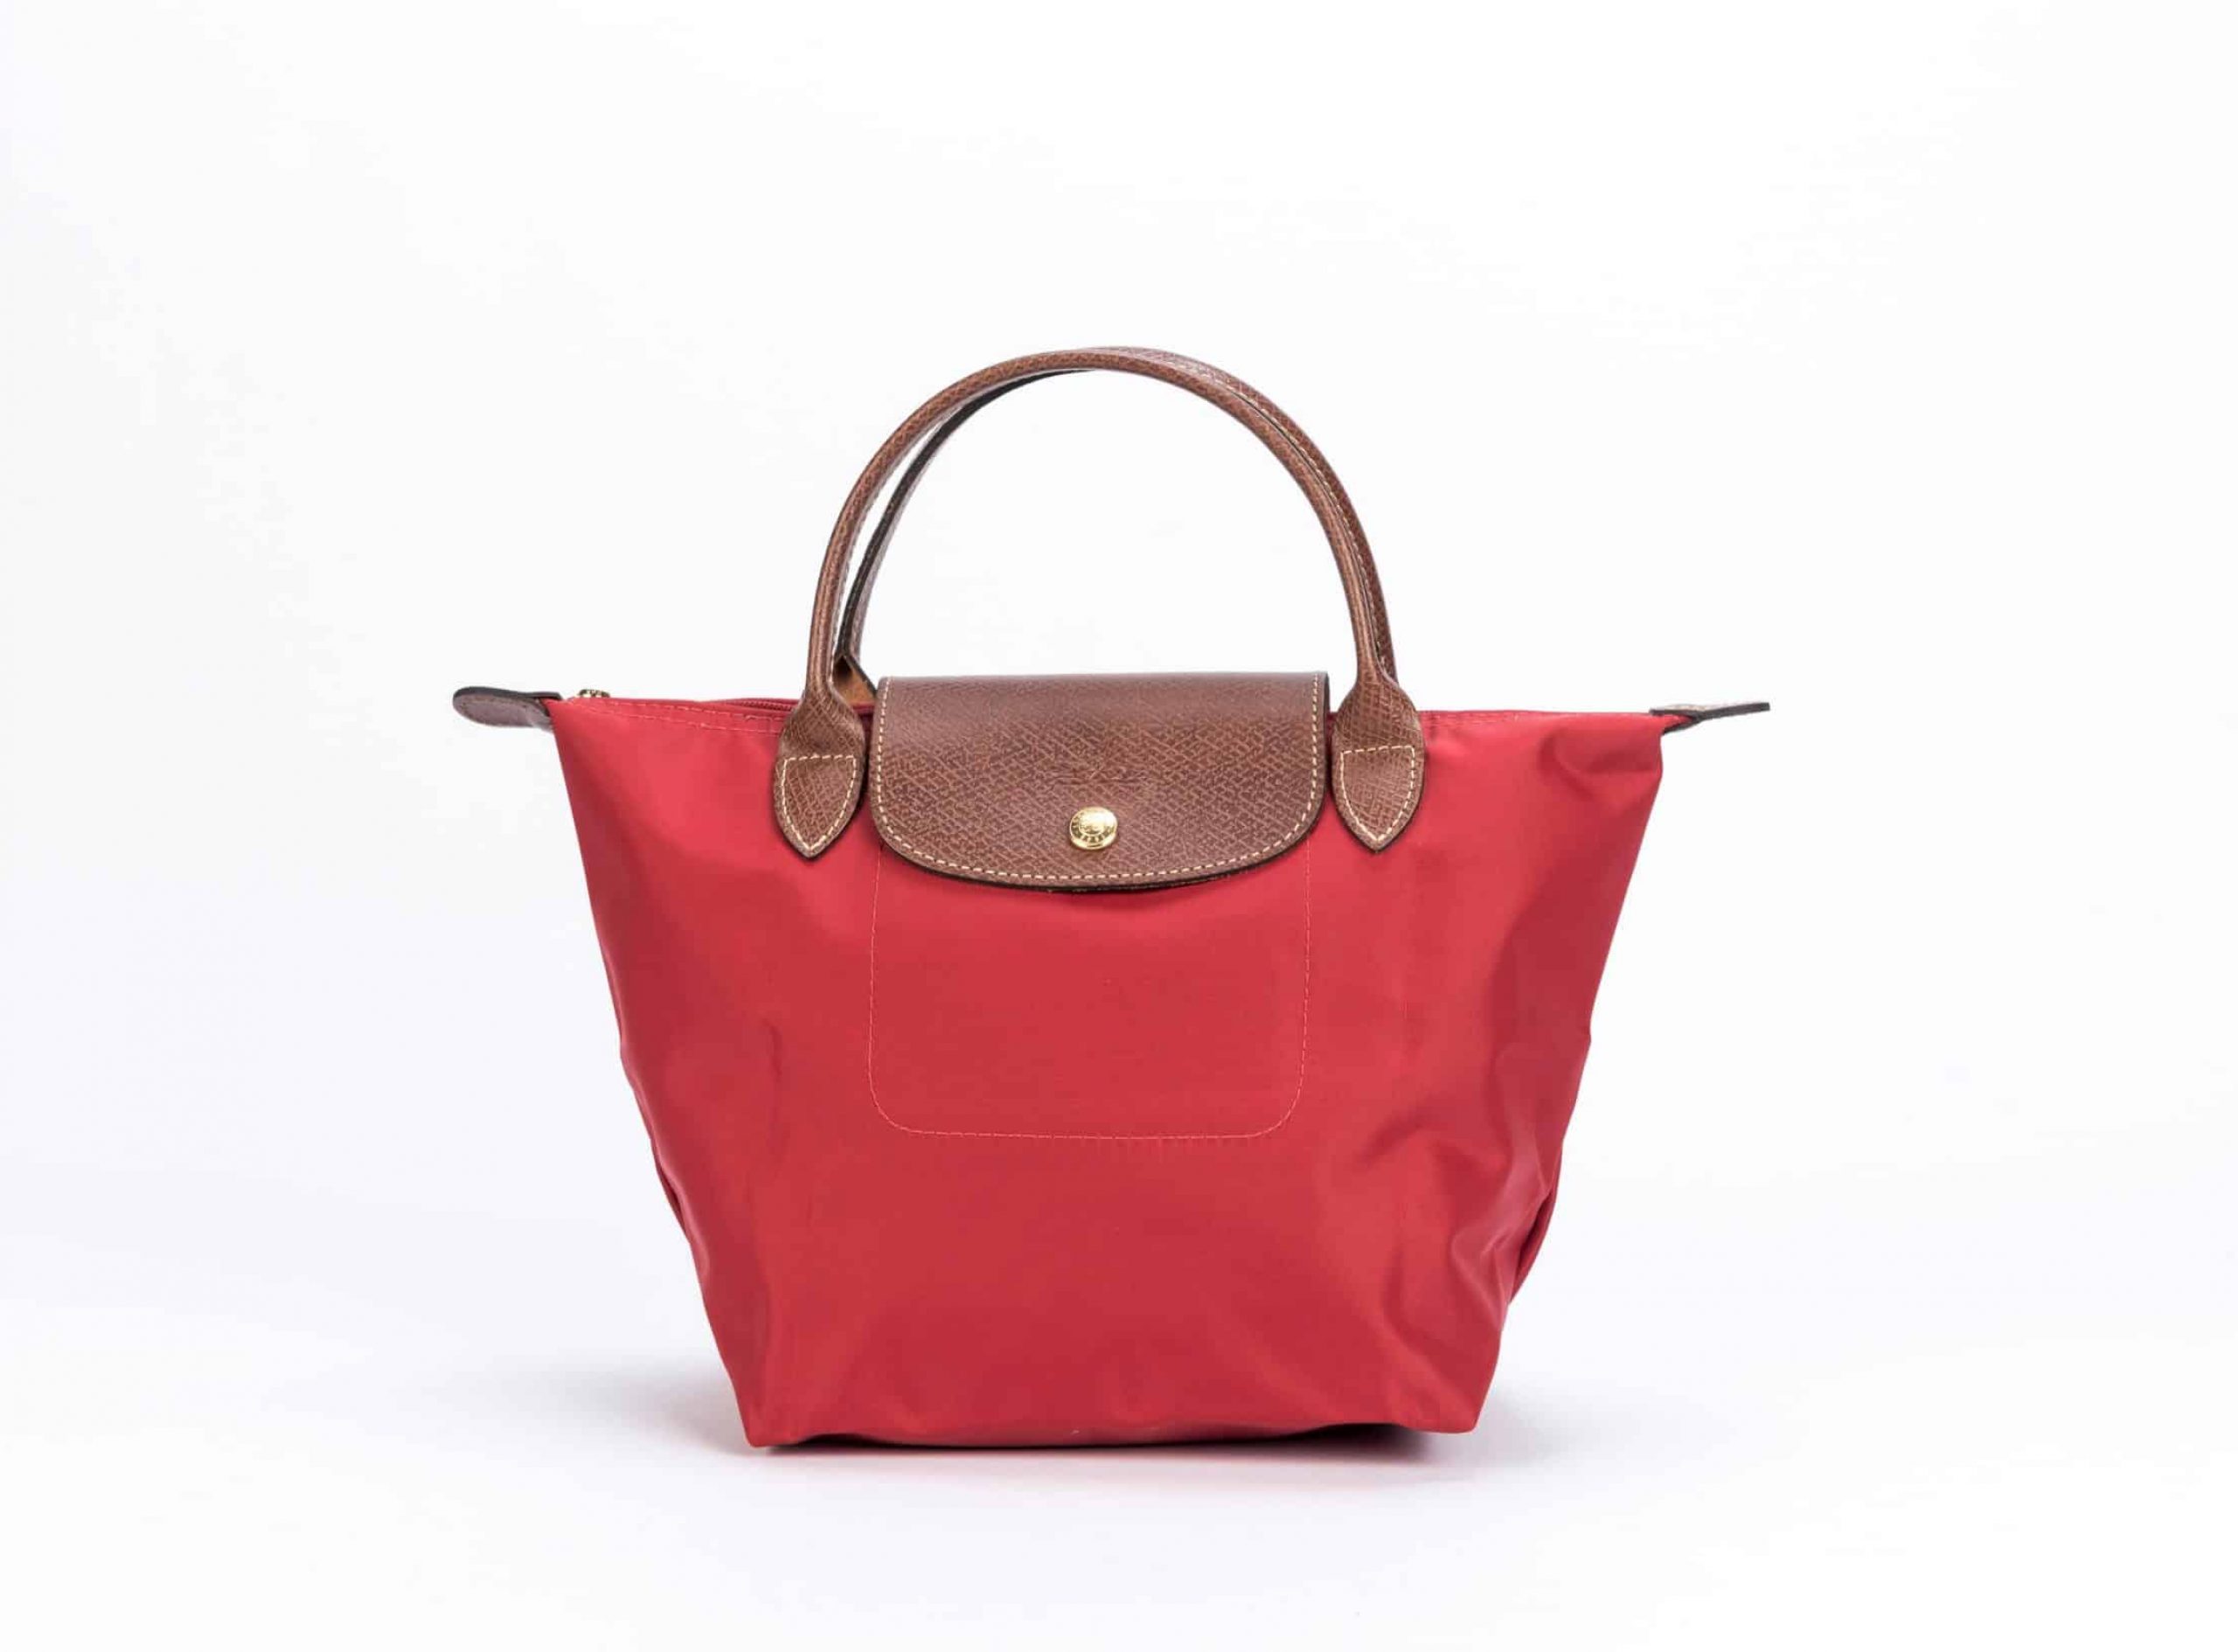 Longchamp Le Pliage Small Tote Bag in Red - 1